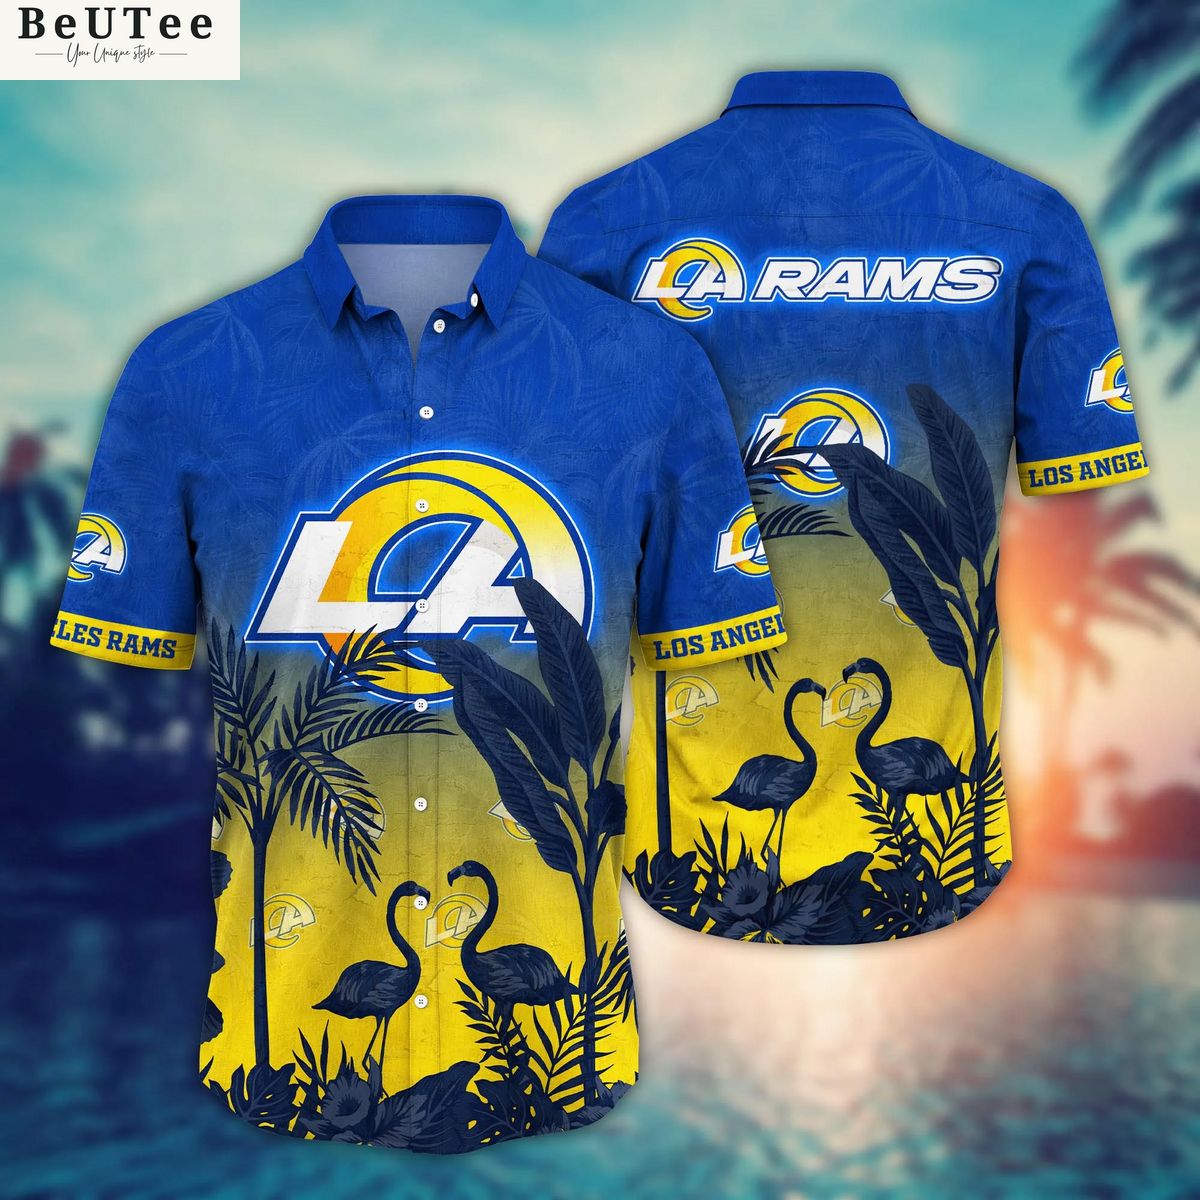 Los Angeles Rams-NFL BASEBALL JERSEY CUSTOM NAME AND NUMBER Best